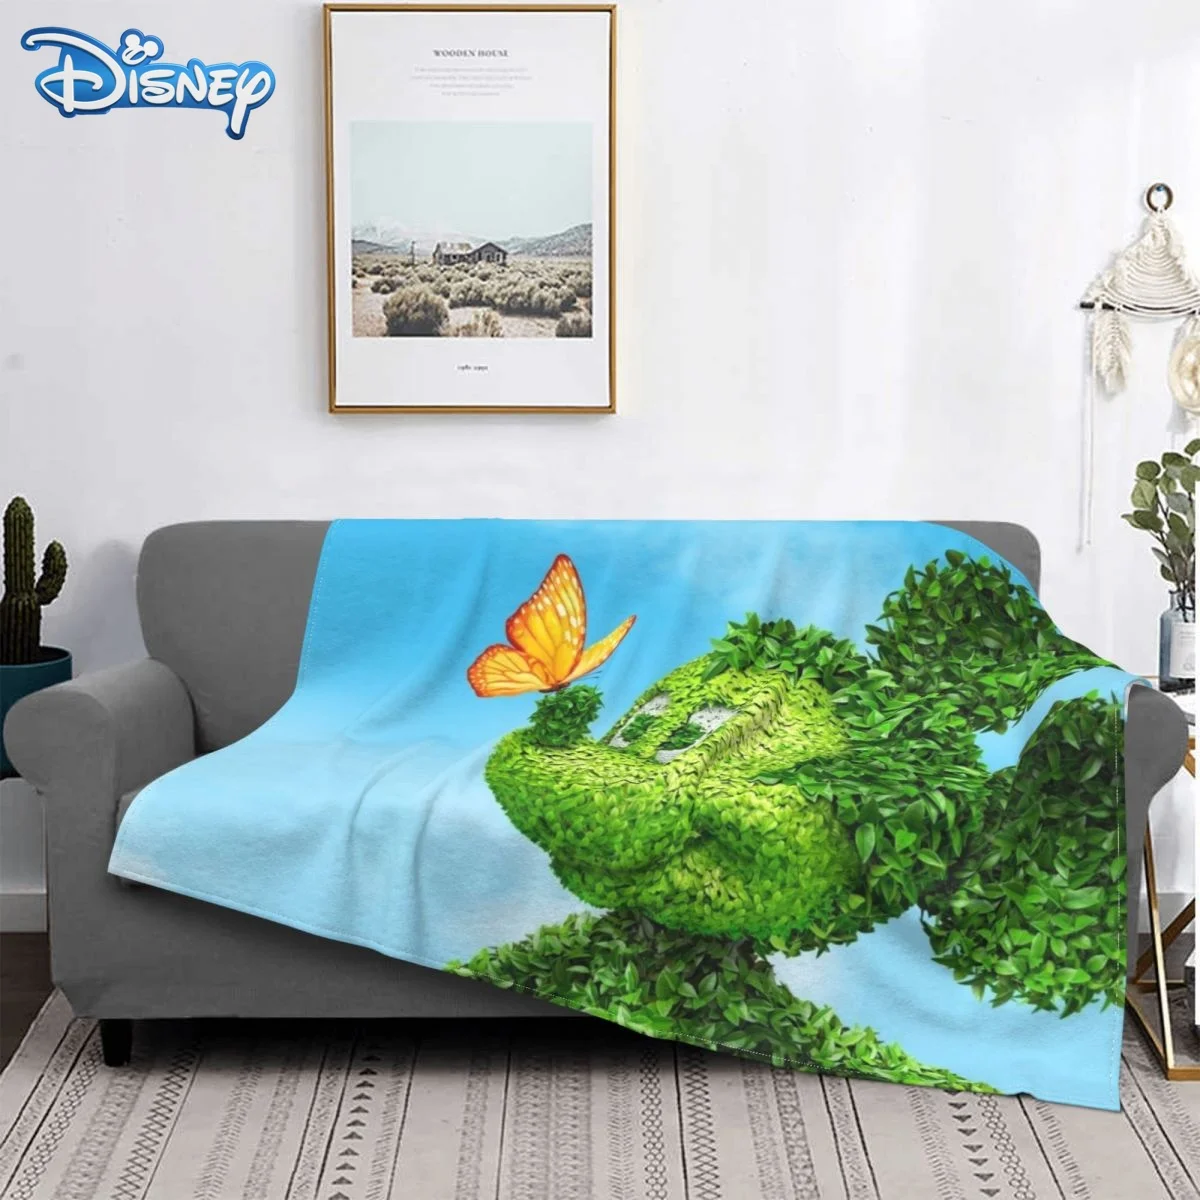 

Disney Cartoon Blanket Plush for Kids Adults Mickey Minnie Print warm Sherpa flannel Bedspread Blanket Throw for Sofa Bed Cover